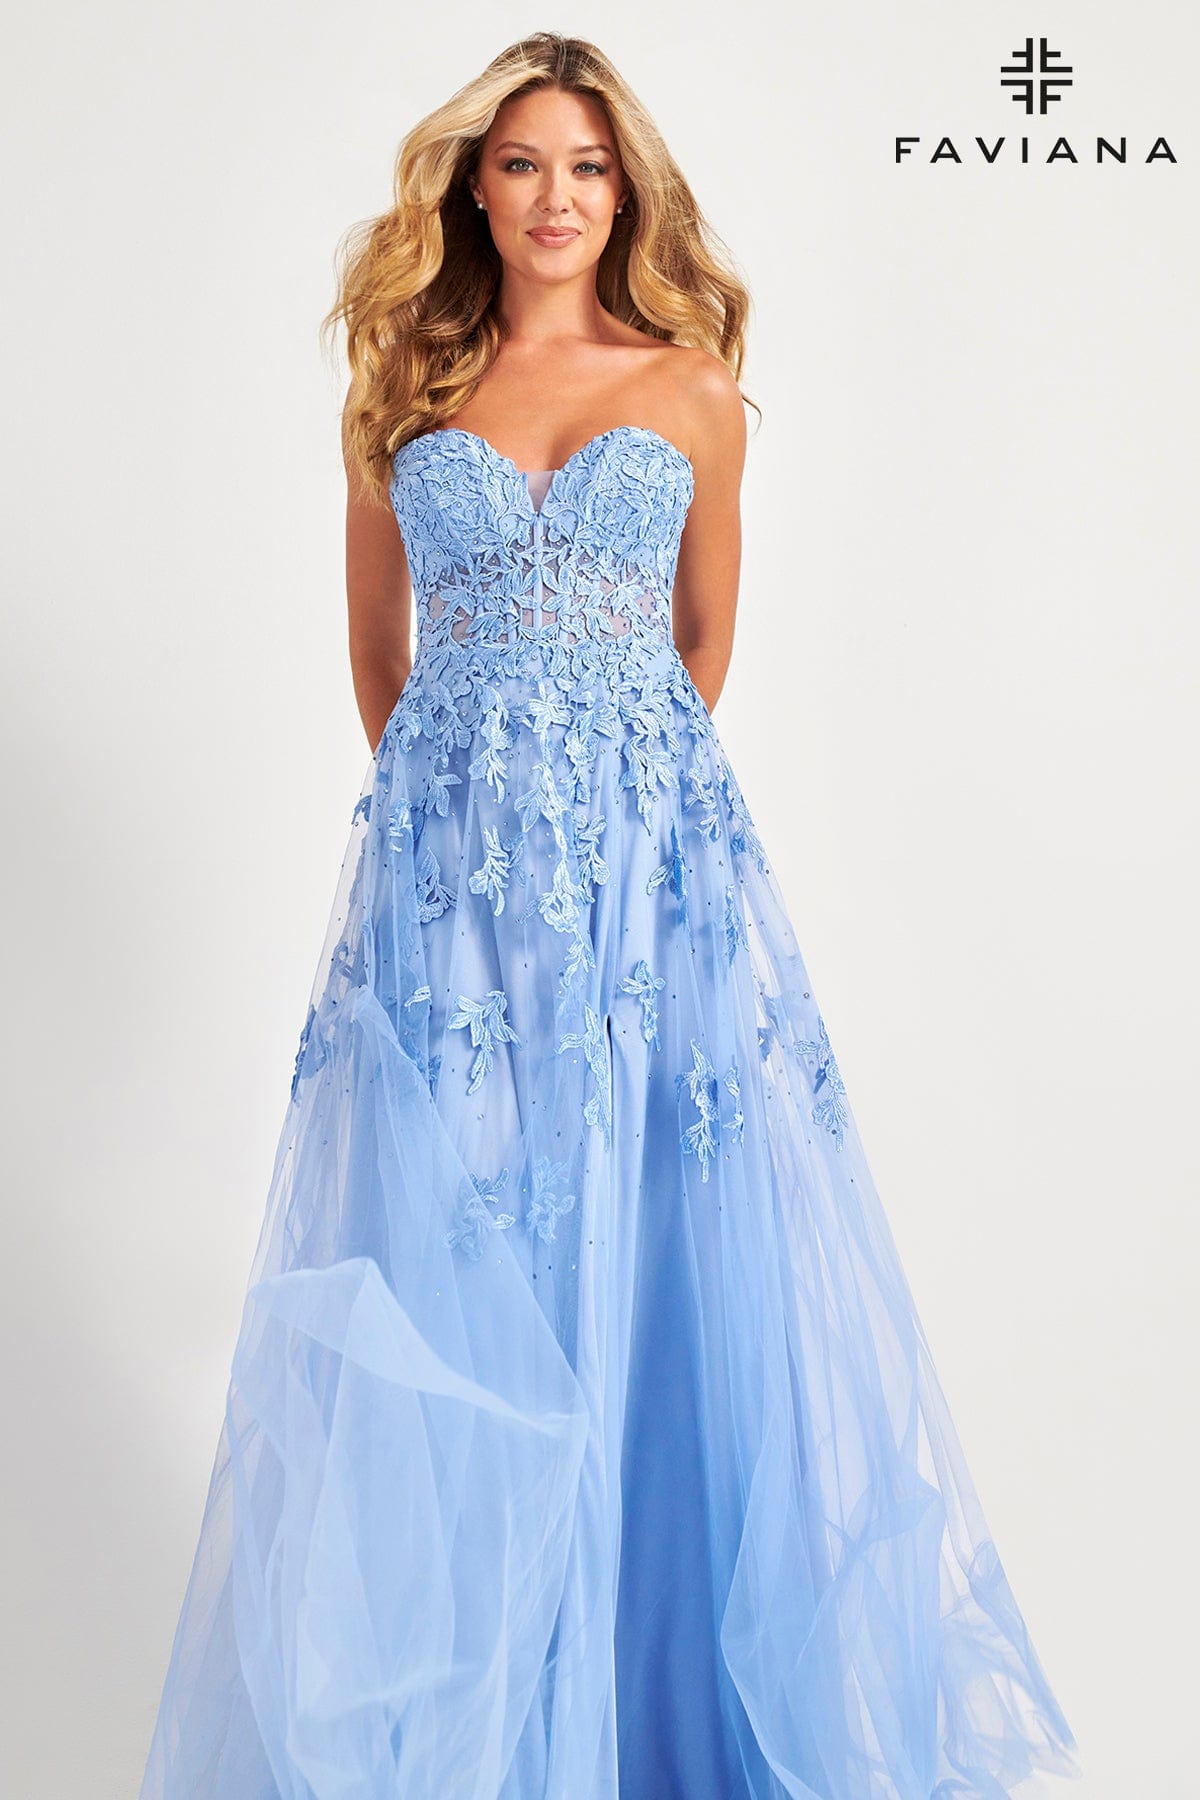 Cloud Blue Long Tulle Prom Dress With Corset Bodice And Lace Applique